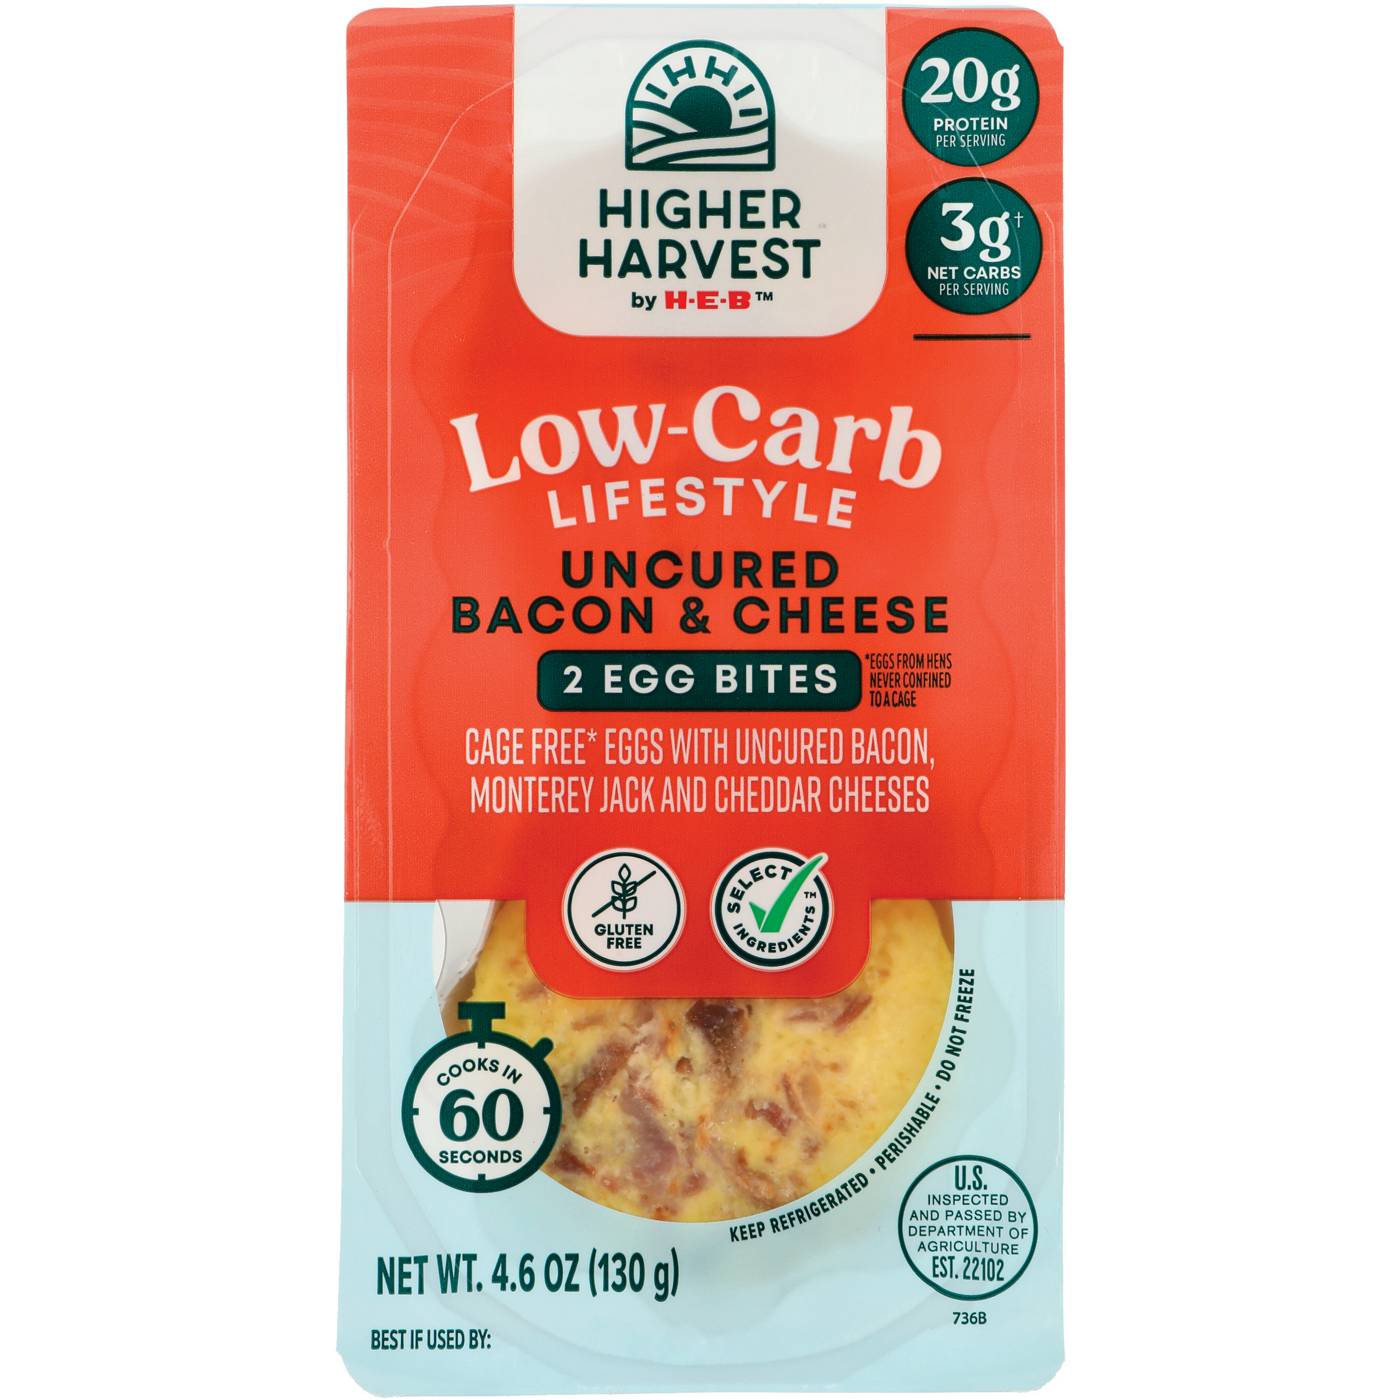 Higher Harvest by H-E-B Low-Carb Lifestyle Egg Bites – Uncured Bacon & Cheese; image 1 of 2